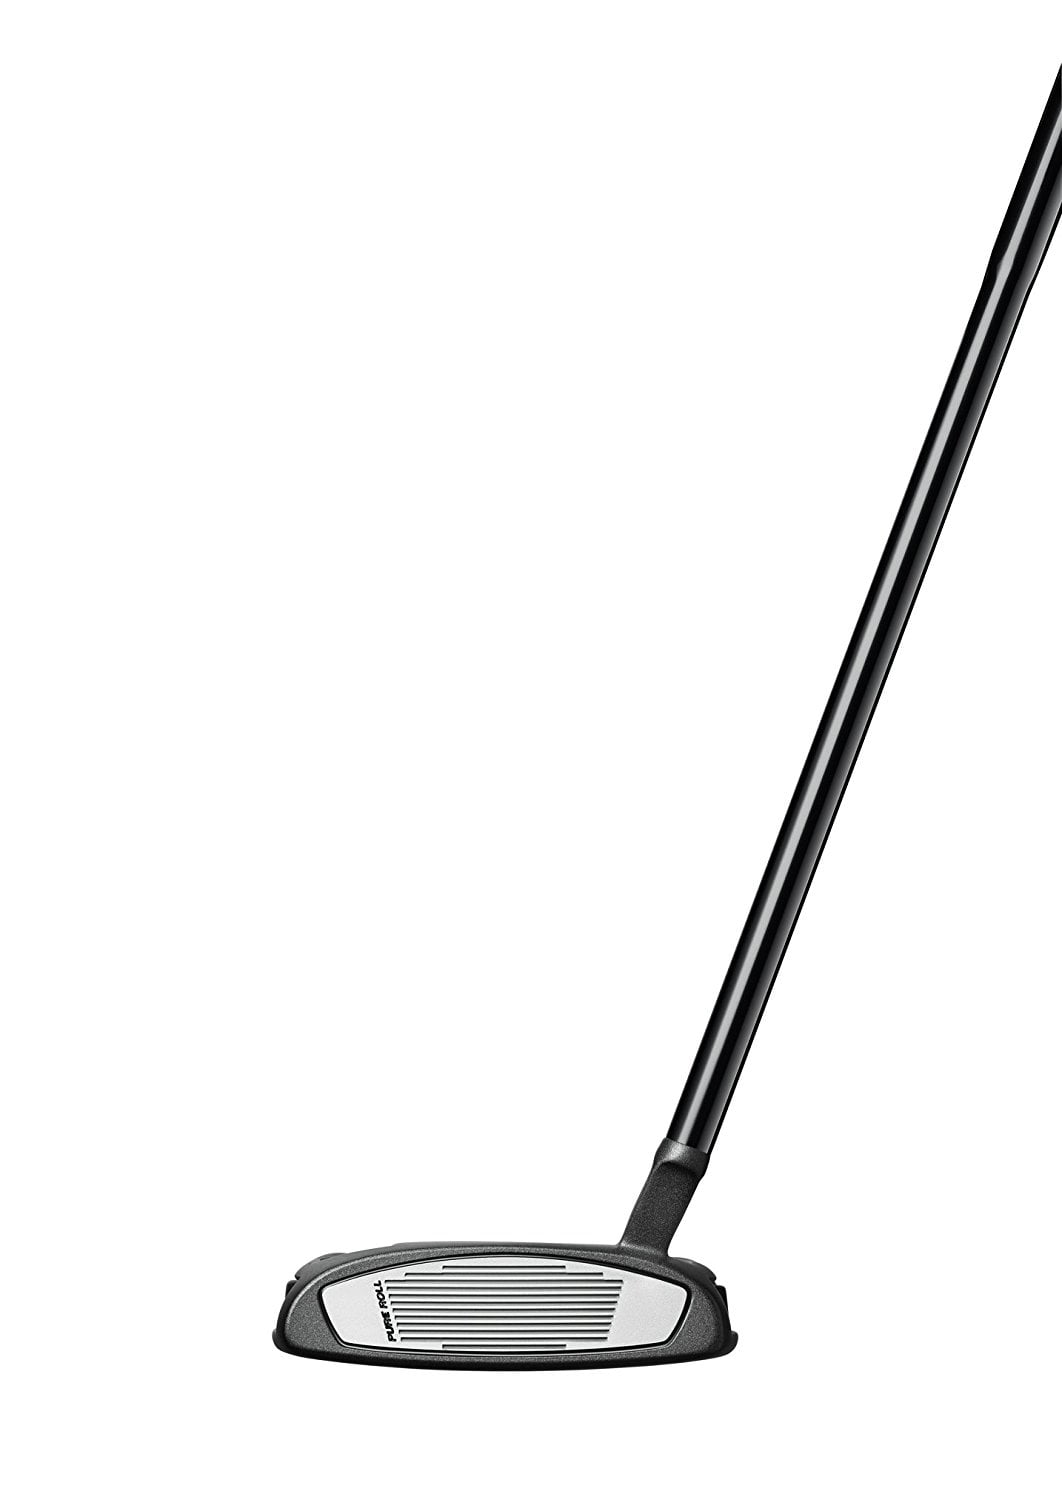 TaylorMade Spider Tour Black (Right Hand, 34 Inches) - Walmart.com